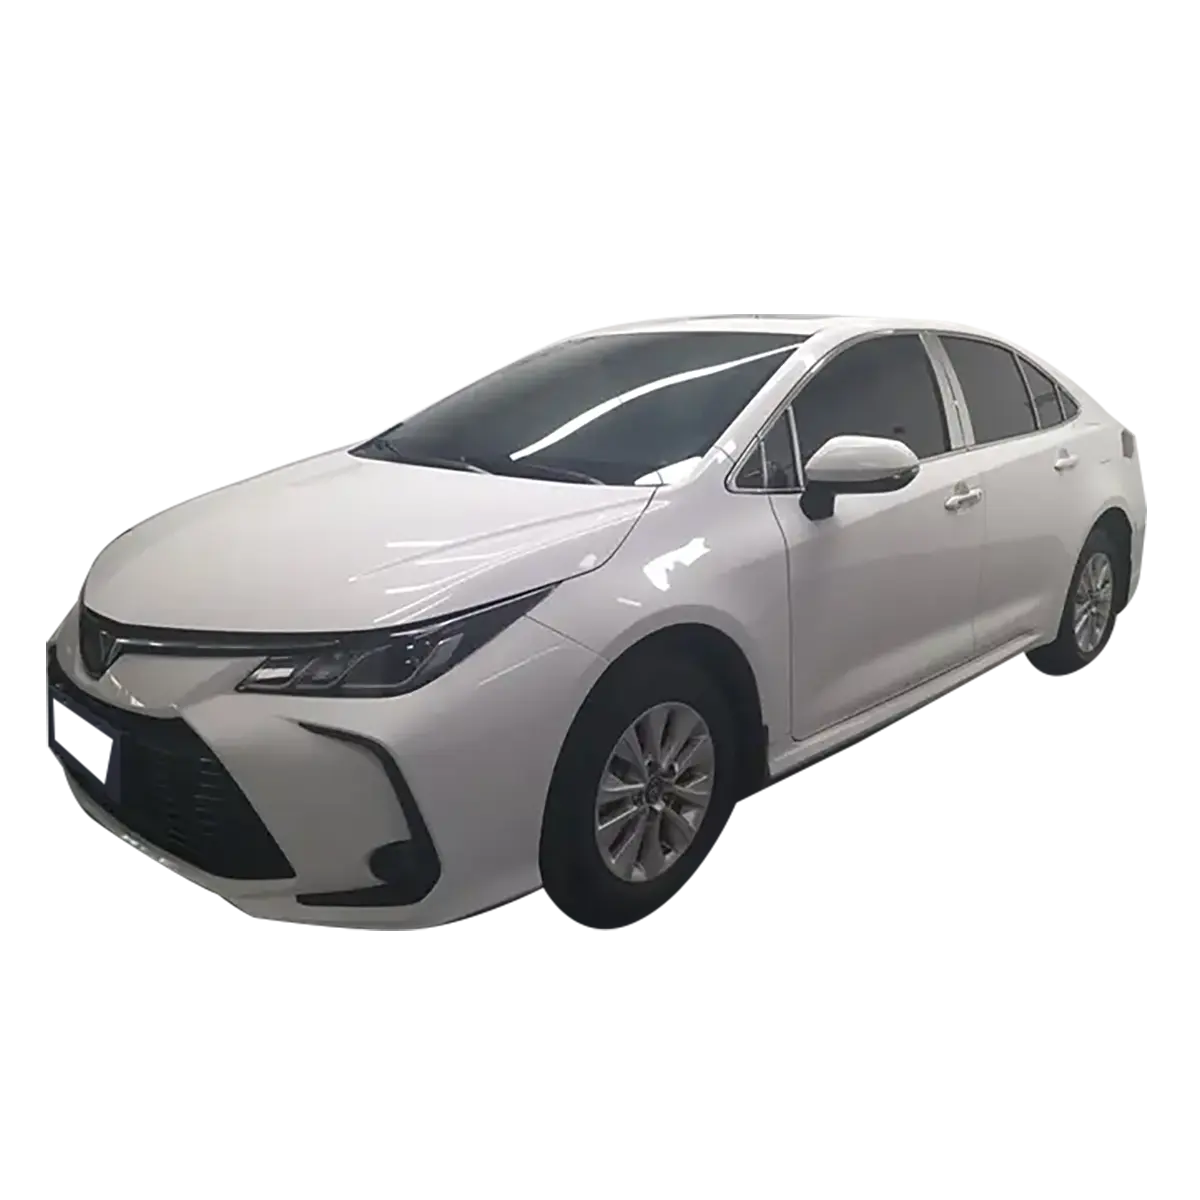 Wholesale 2019 toyota corolla 1.2T S-CVT GL-i Sunroof special edition used cars cheap prices taxi driving school online car